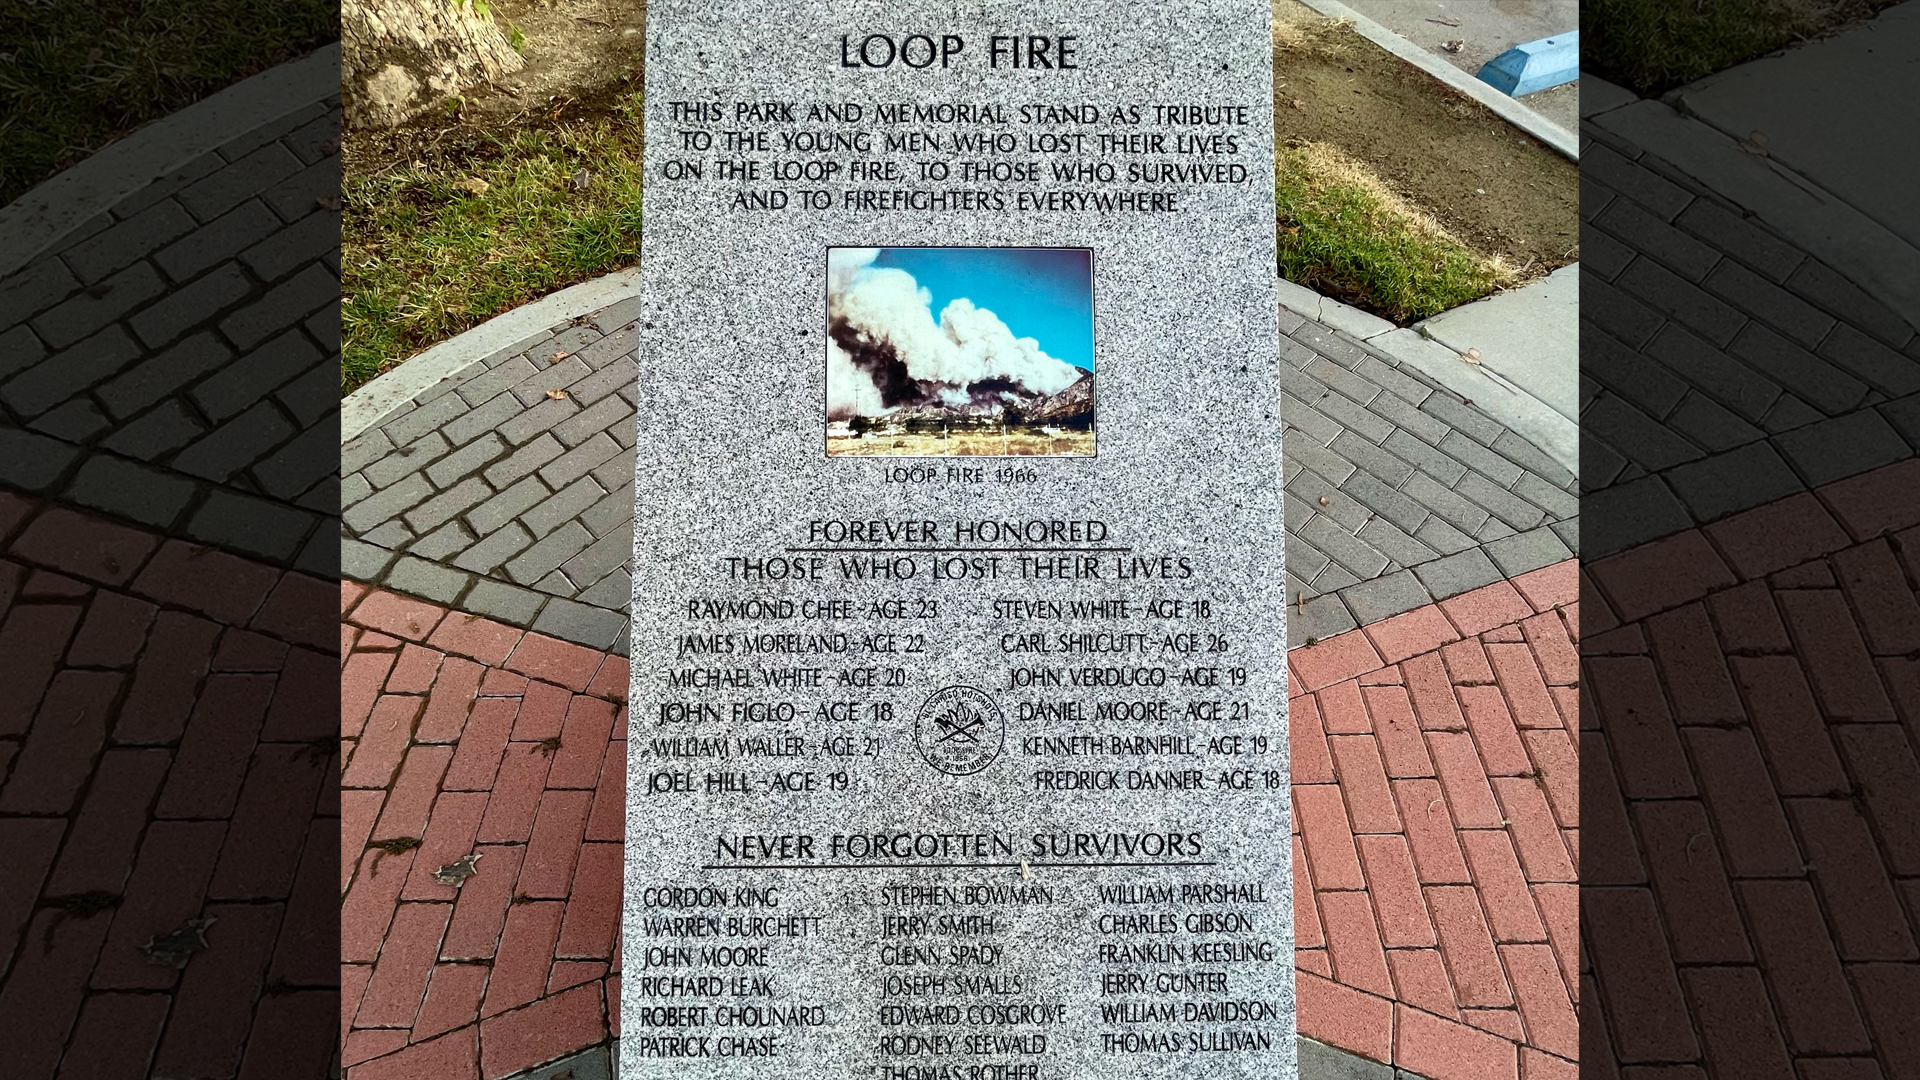 The Loop Fire: 56 Year Anniversary